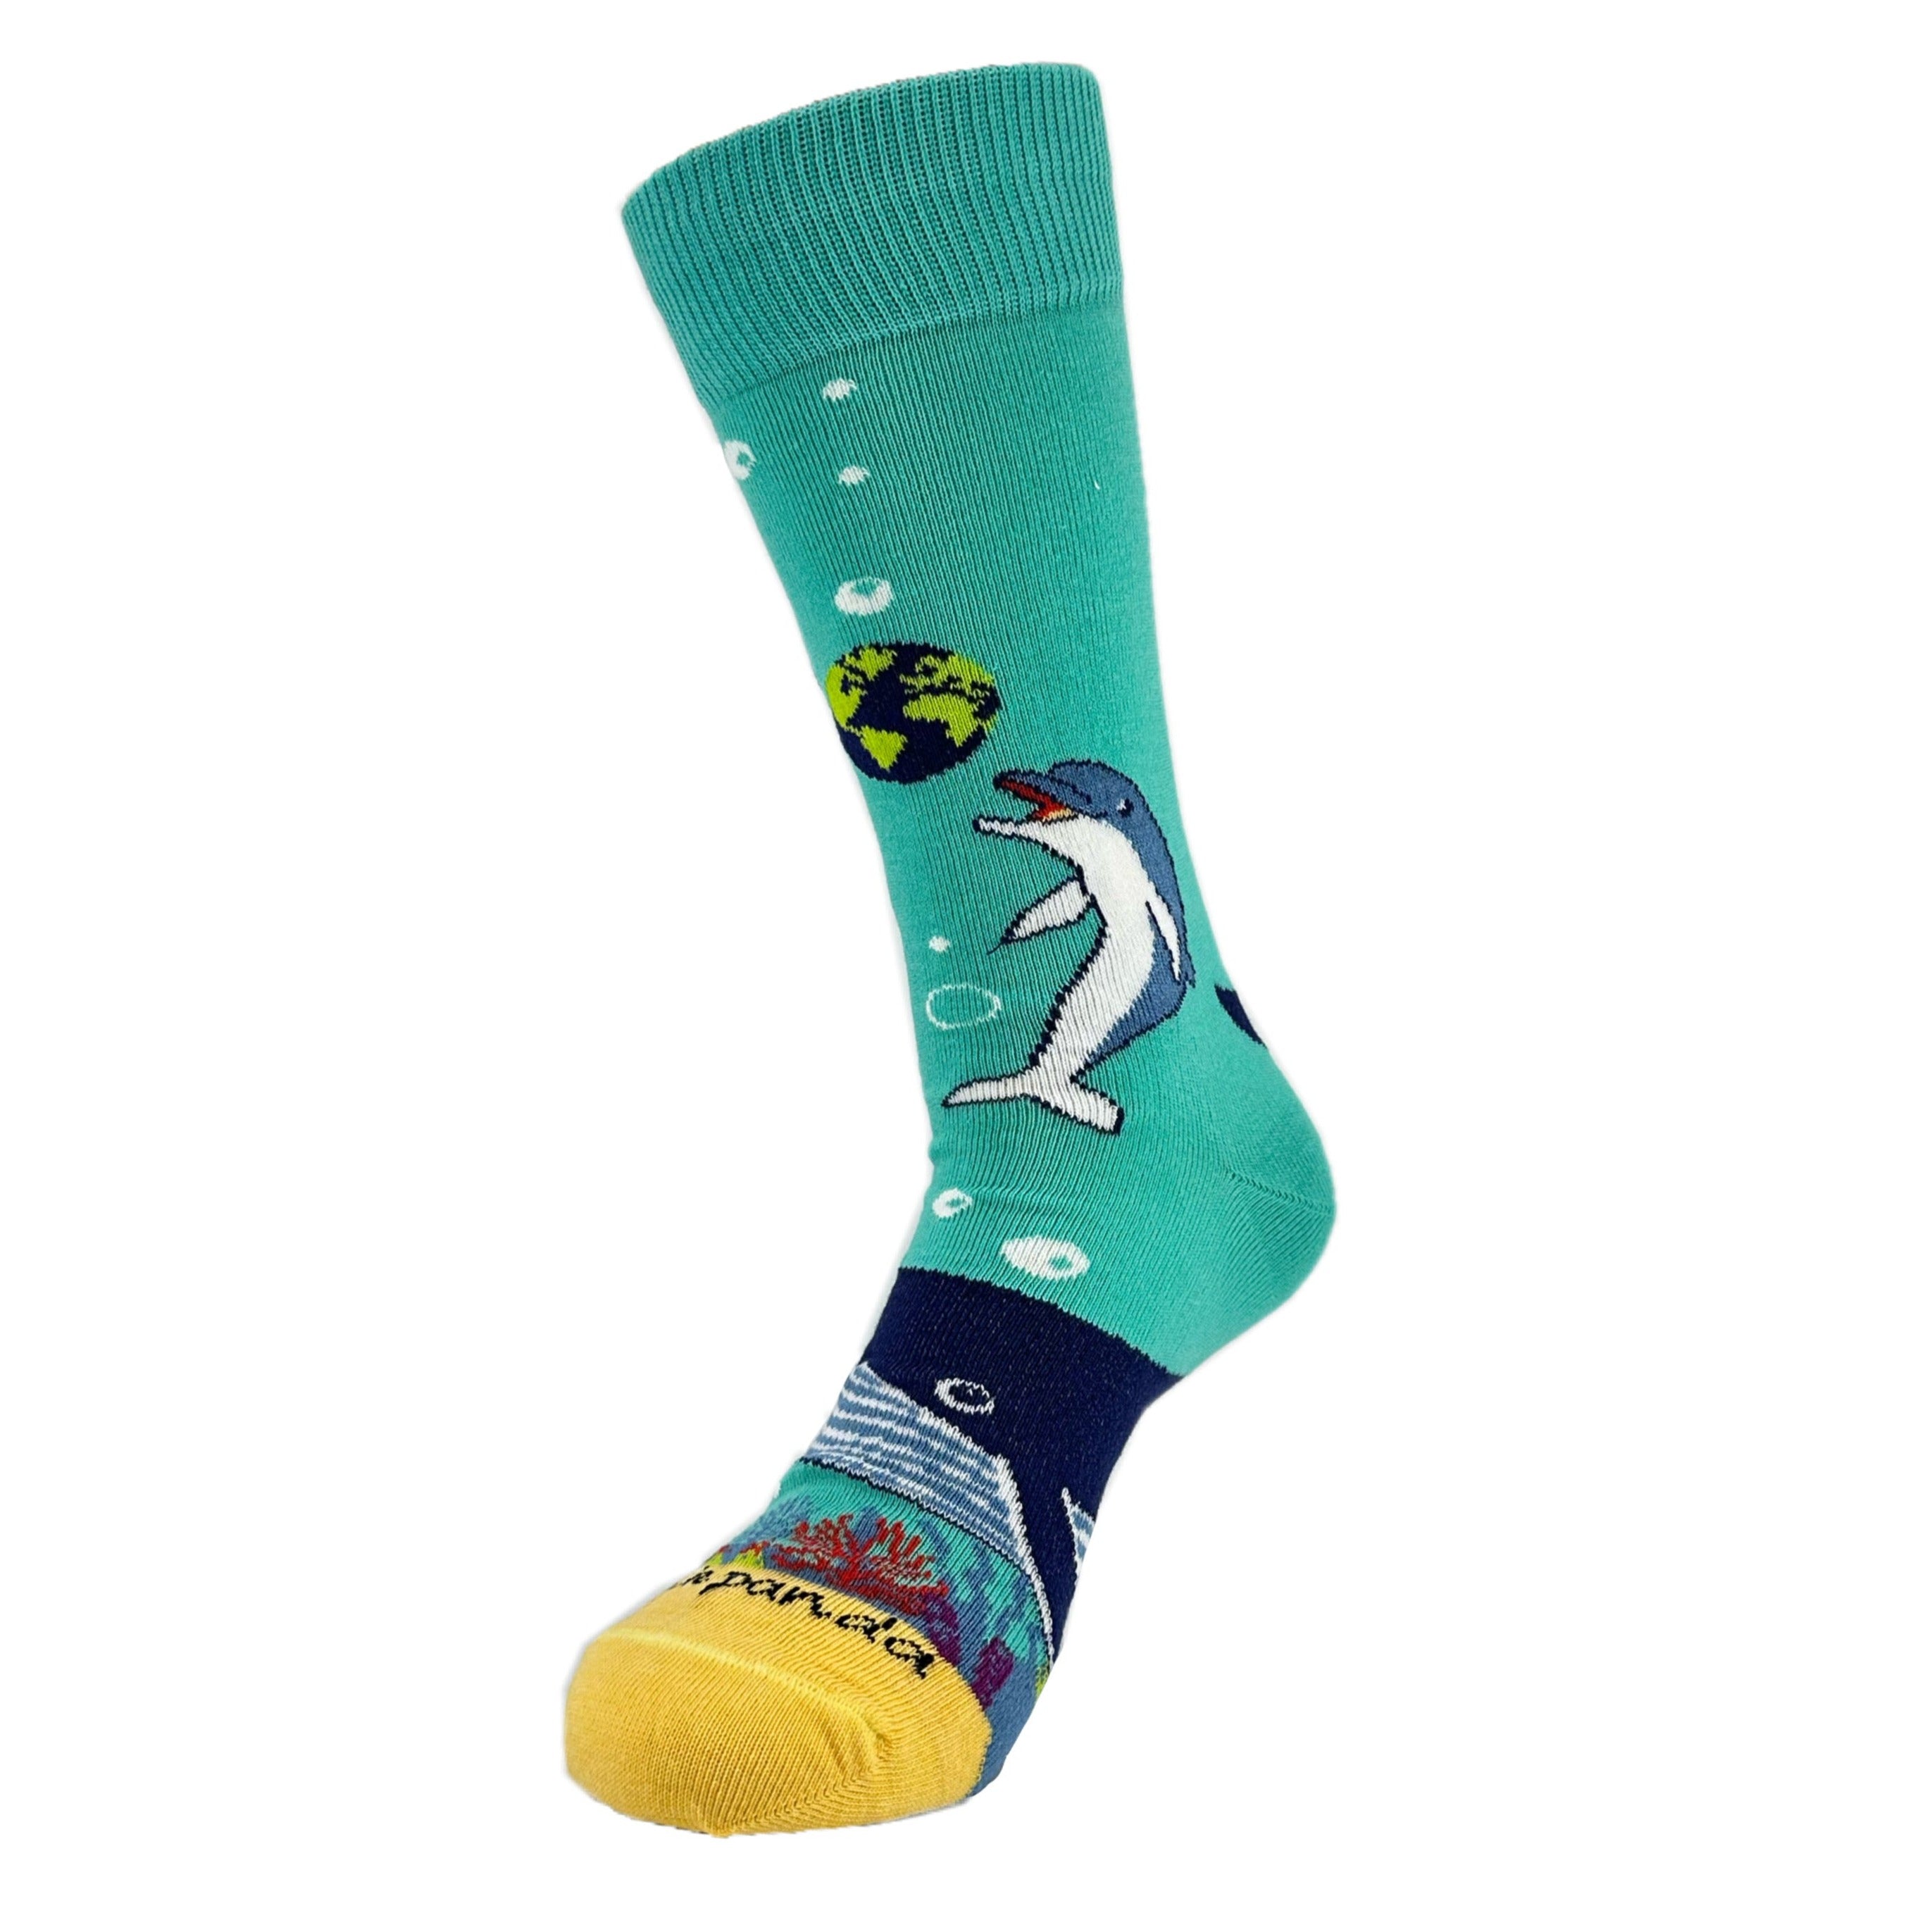 Dolphins and the Earth Socks from the Sock Panda (Adult Medium)